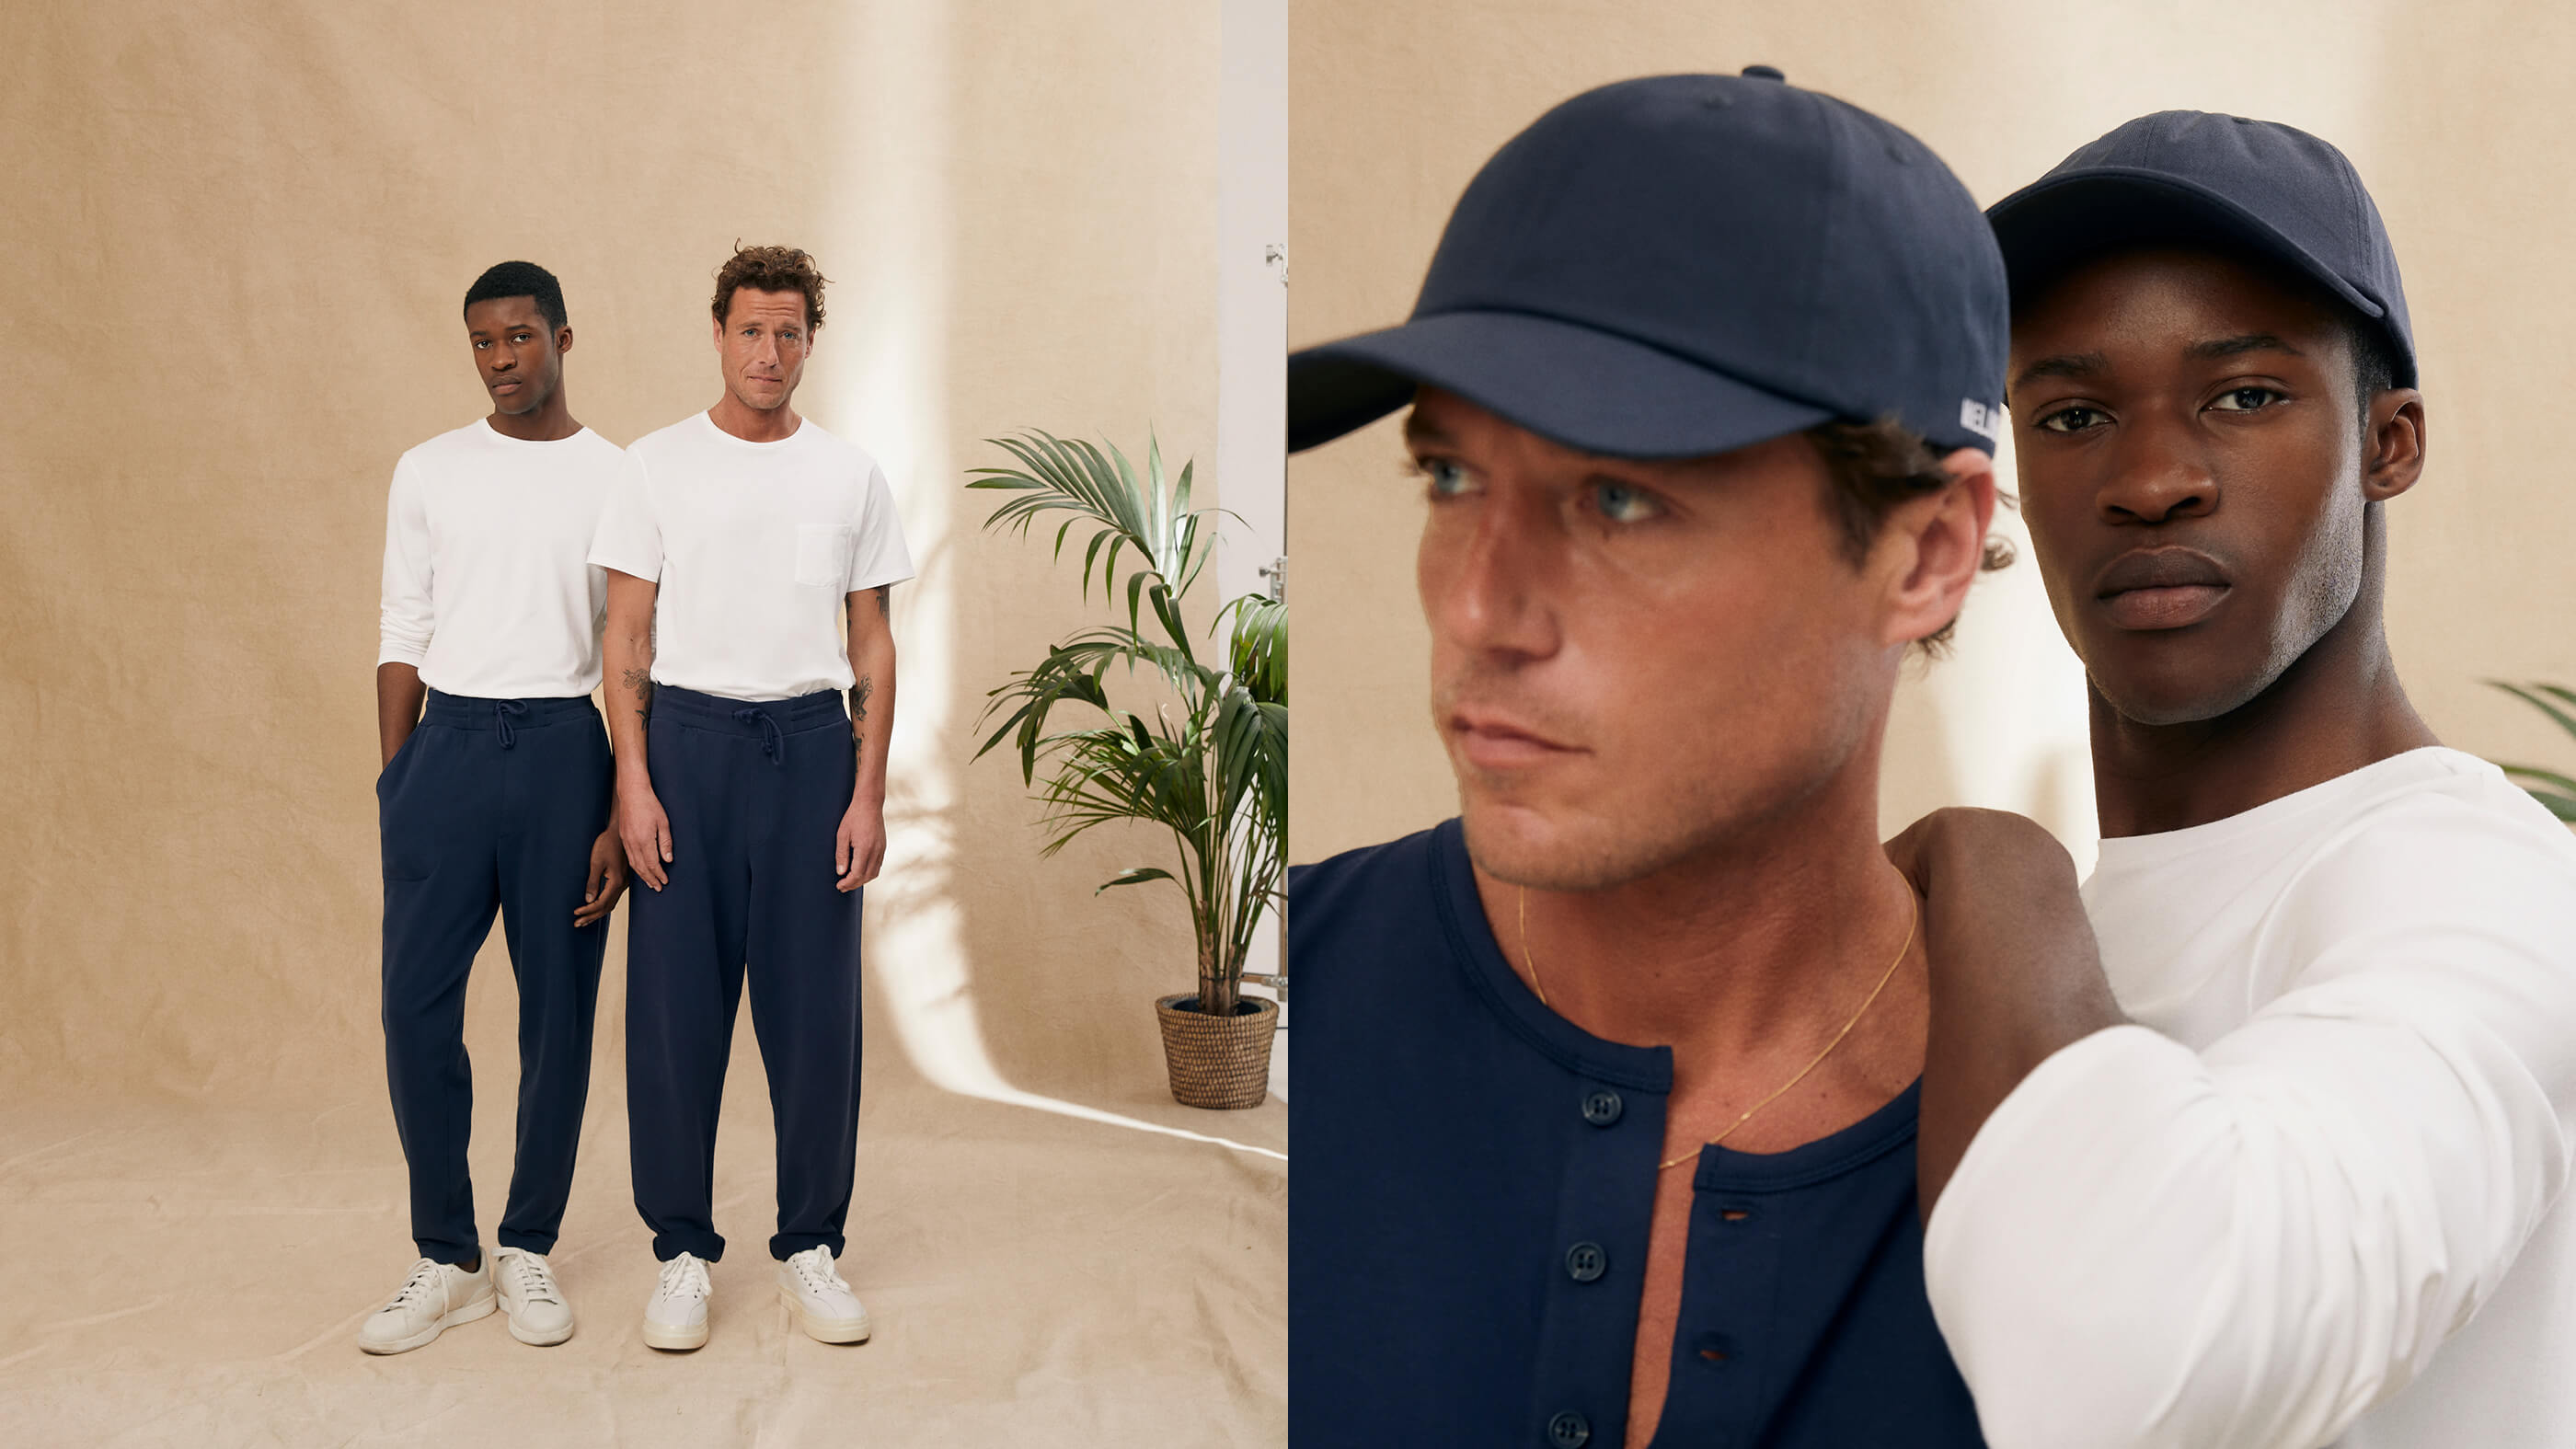 models wearing navy and white sweats with navy caps